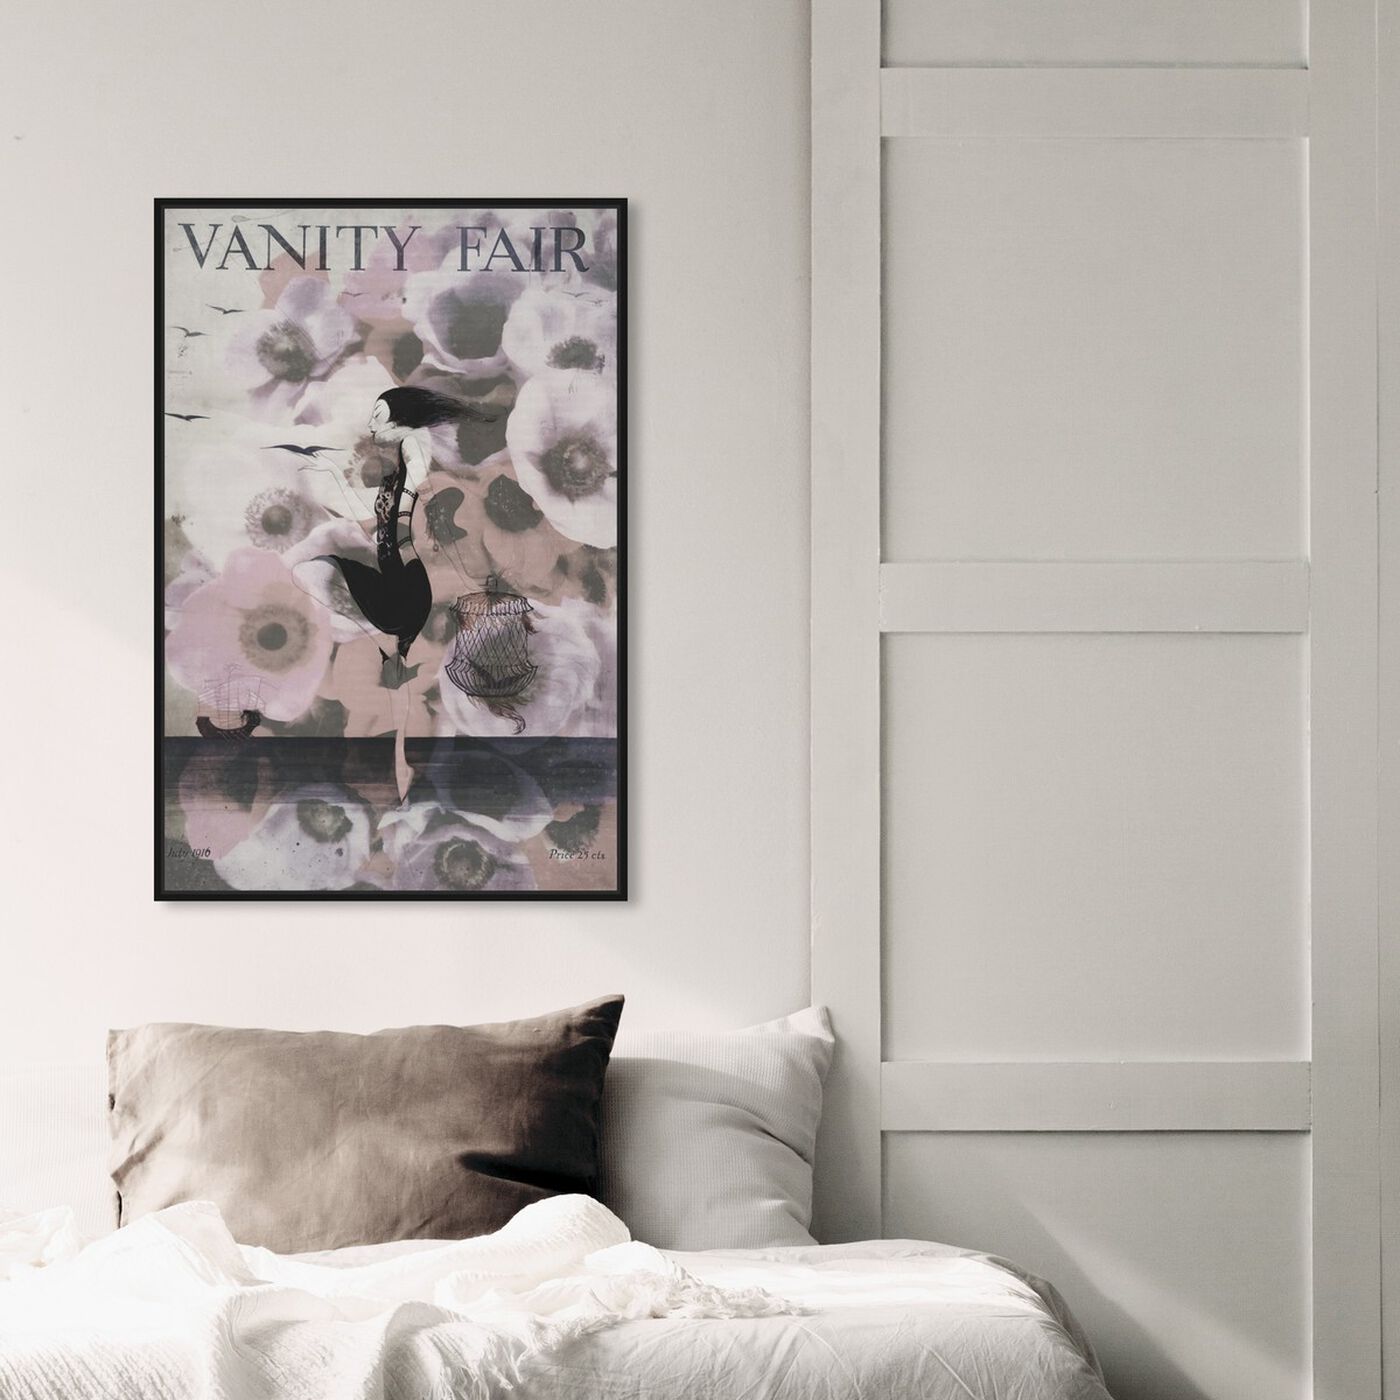 Hanging view of Vanity Fair featuring advertising and publications art.